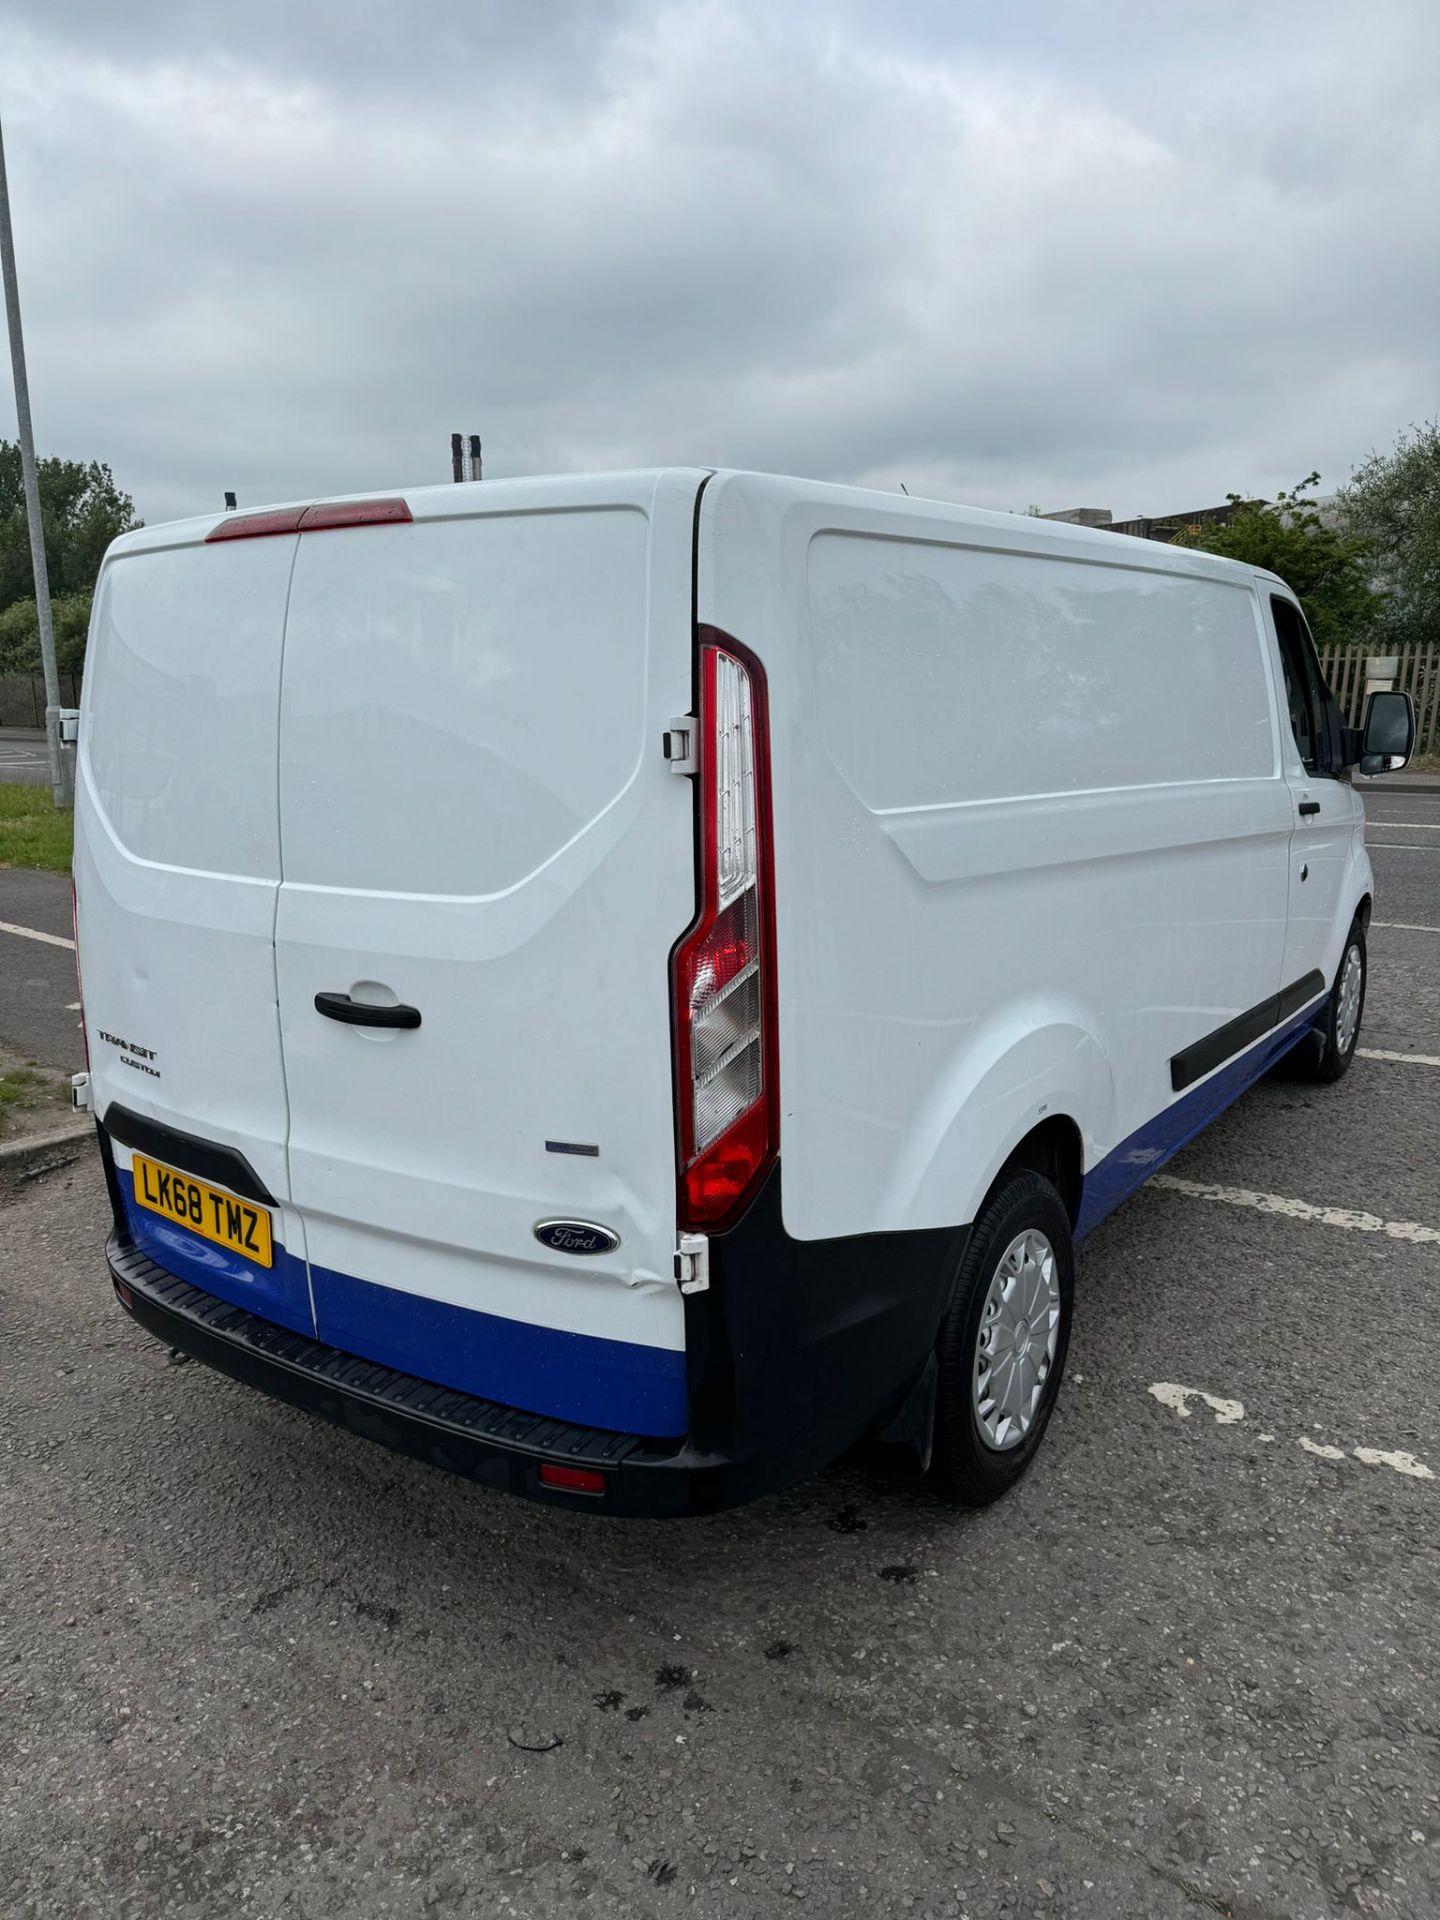 2019 68 FORD TRANSIT CUSTOM LWB PANEL VAN - 84K MILES - AIR CON - PLY LINED - EURO 6 - Image 6 of 11